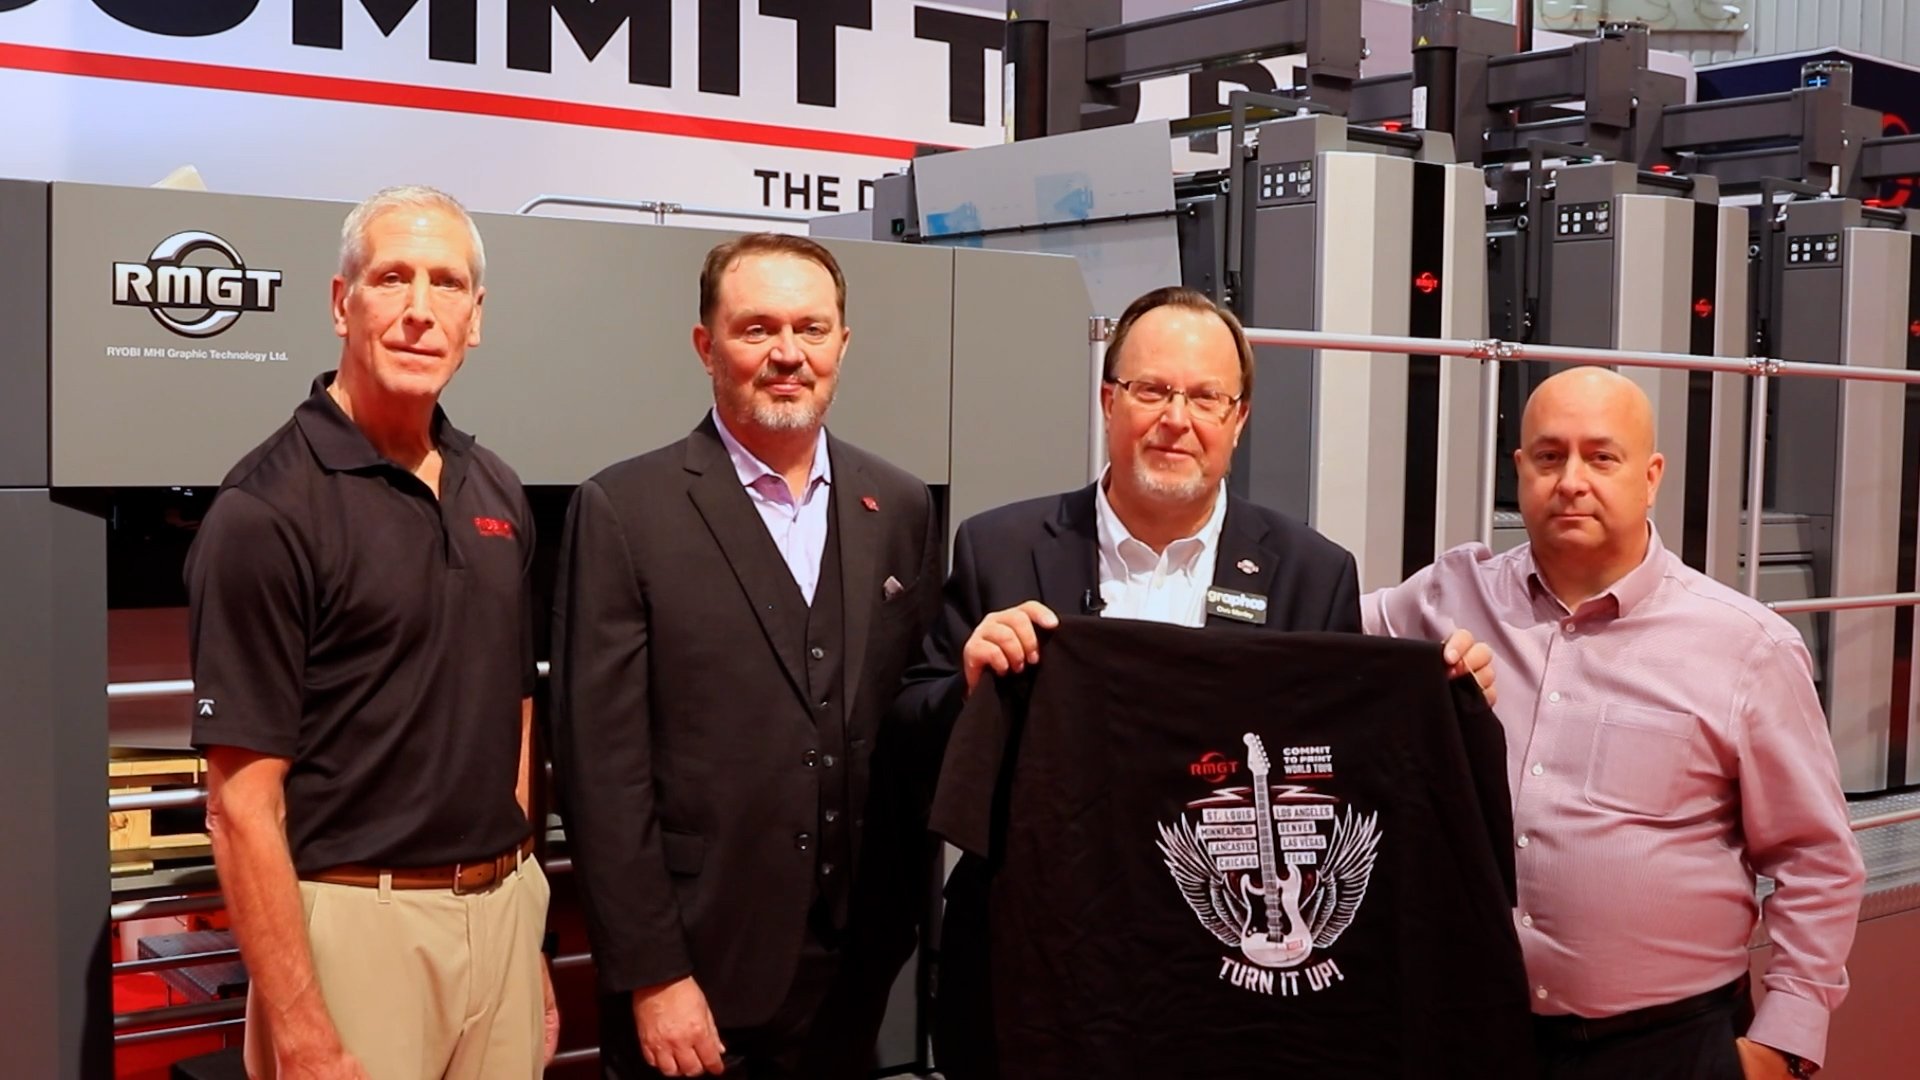 RMGT “Commit to Print World Tour” at PRINTING United